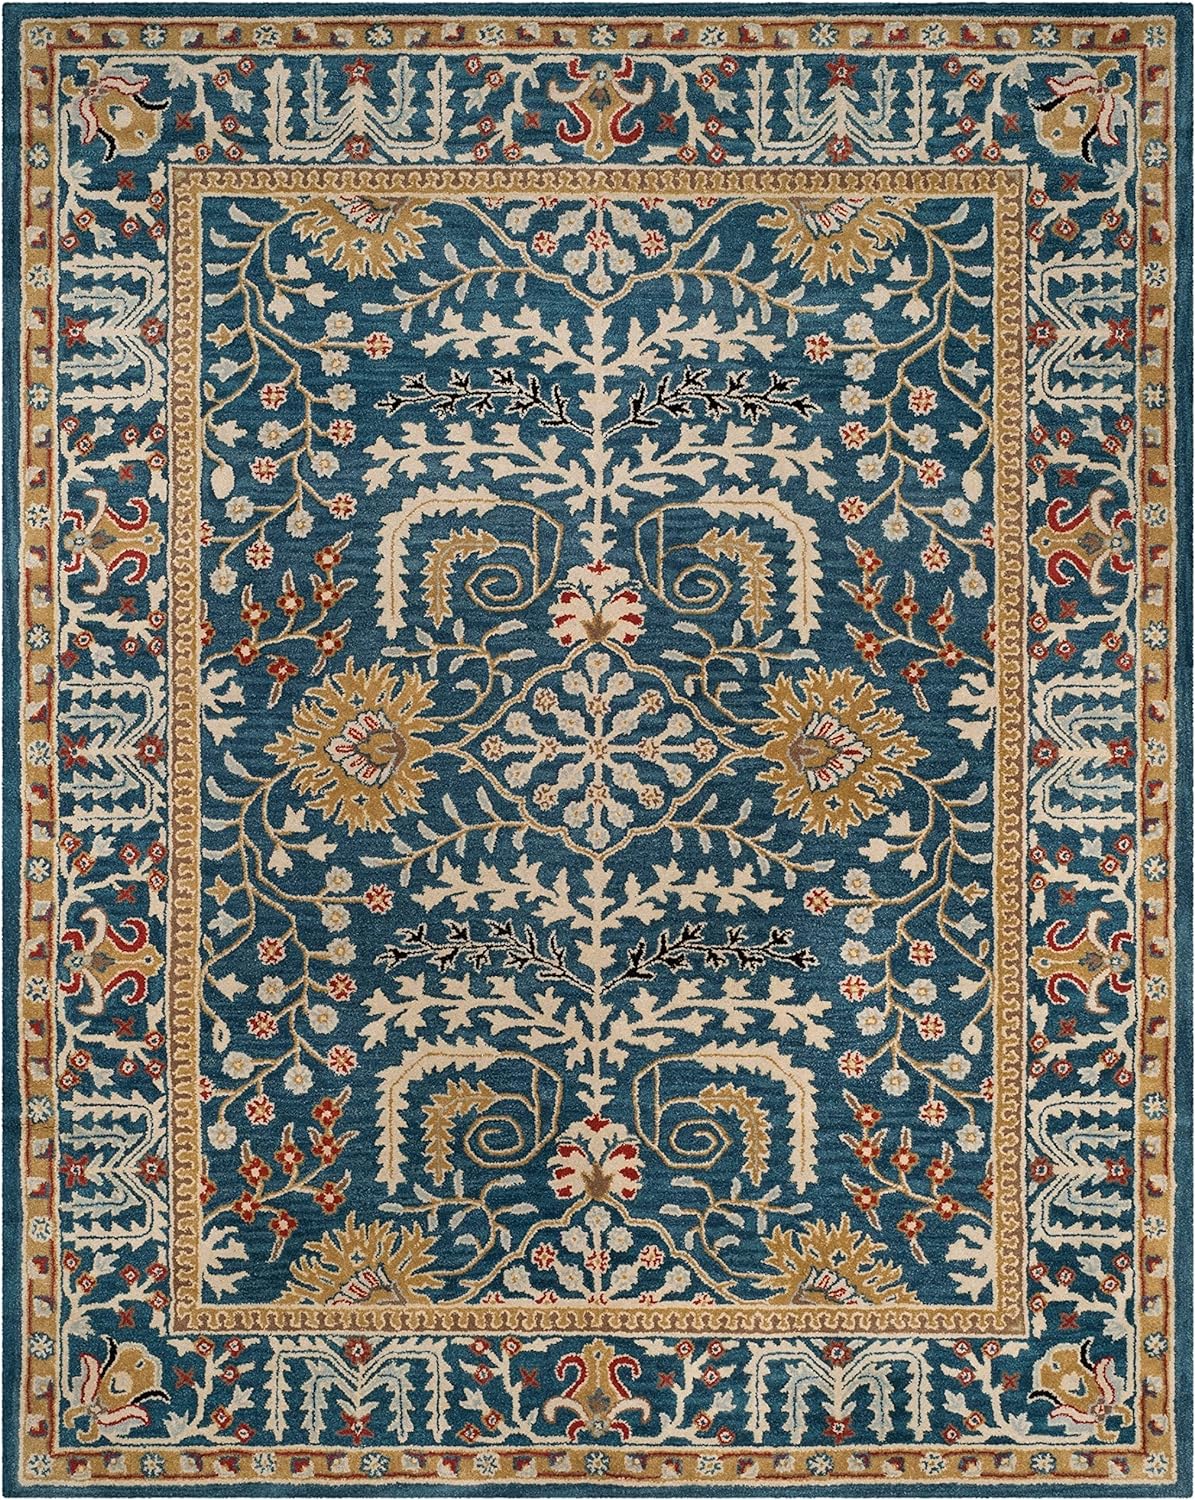 SAFAVIEH Antiquity Collection Area Rug - 9\' x 12\', Dark Blue & Multi, Handmade Traditional Oriental Wool, Ideal for High Traffic Areas in Living Room, Bedroom (AT64B)